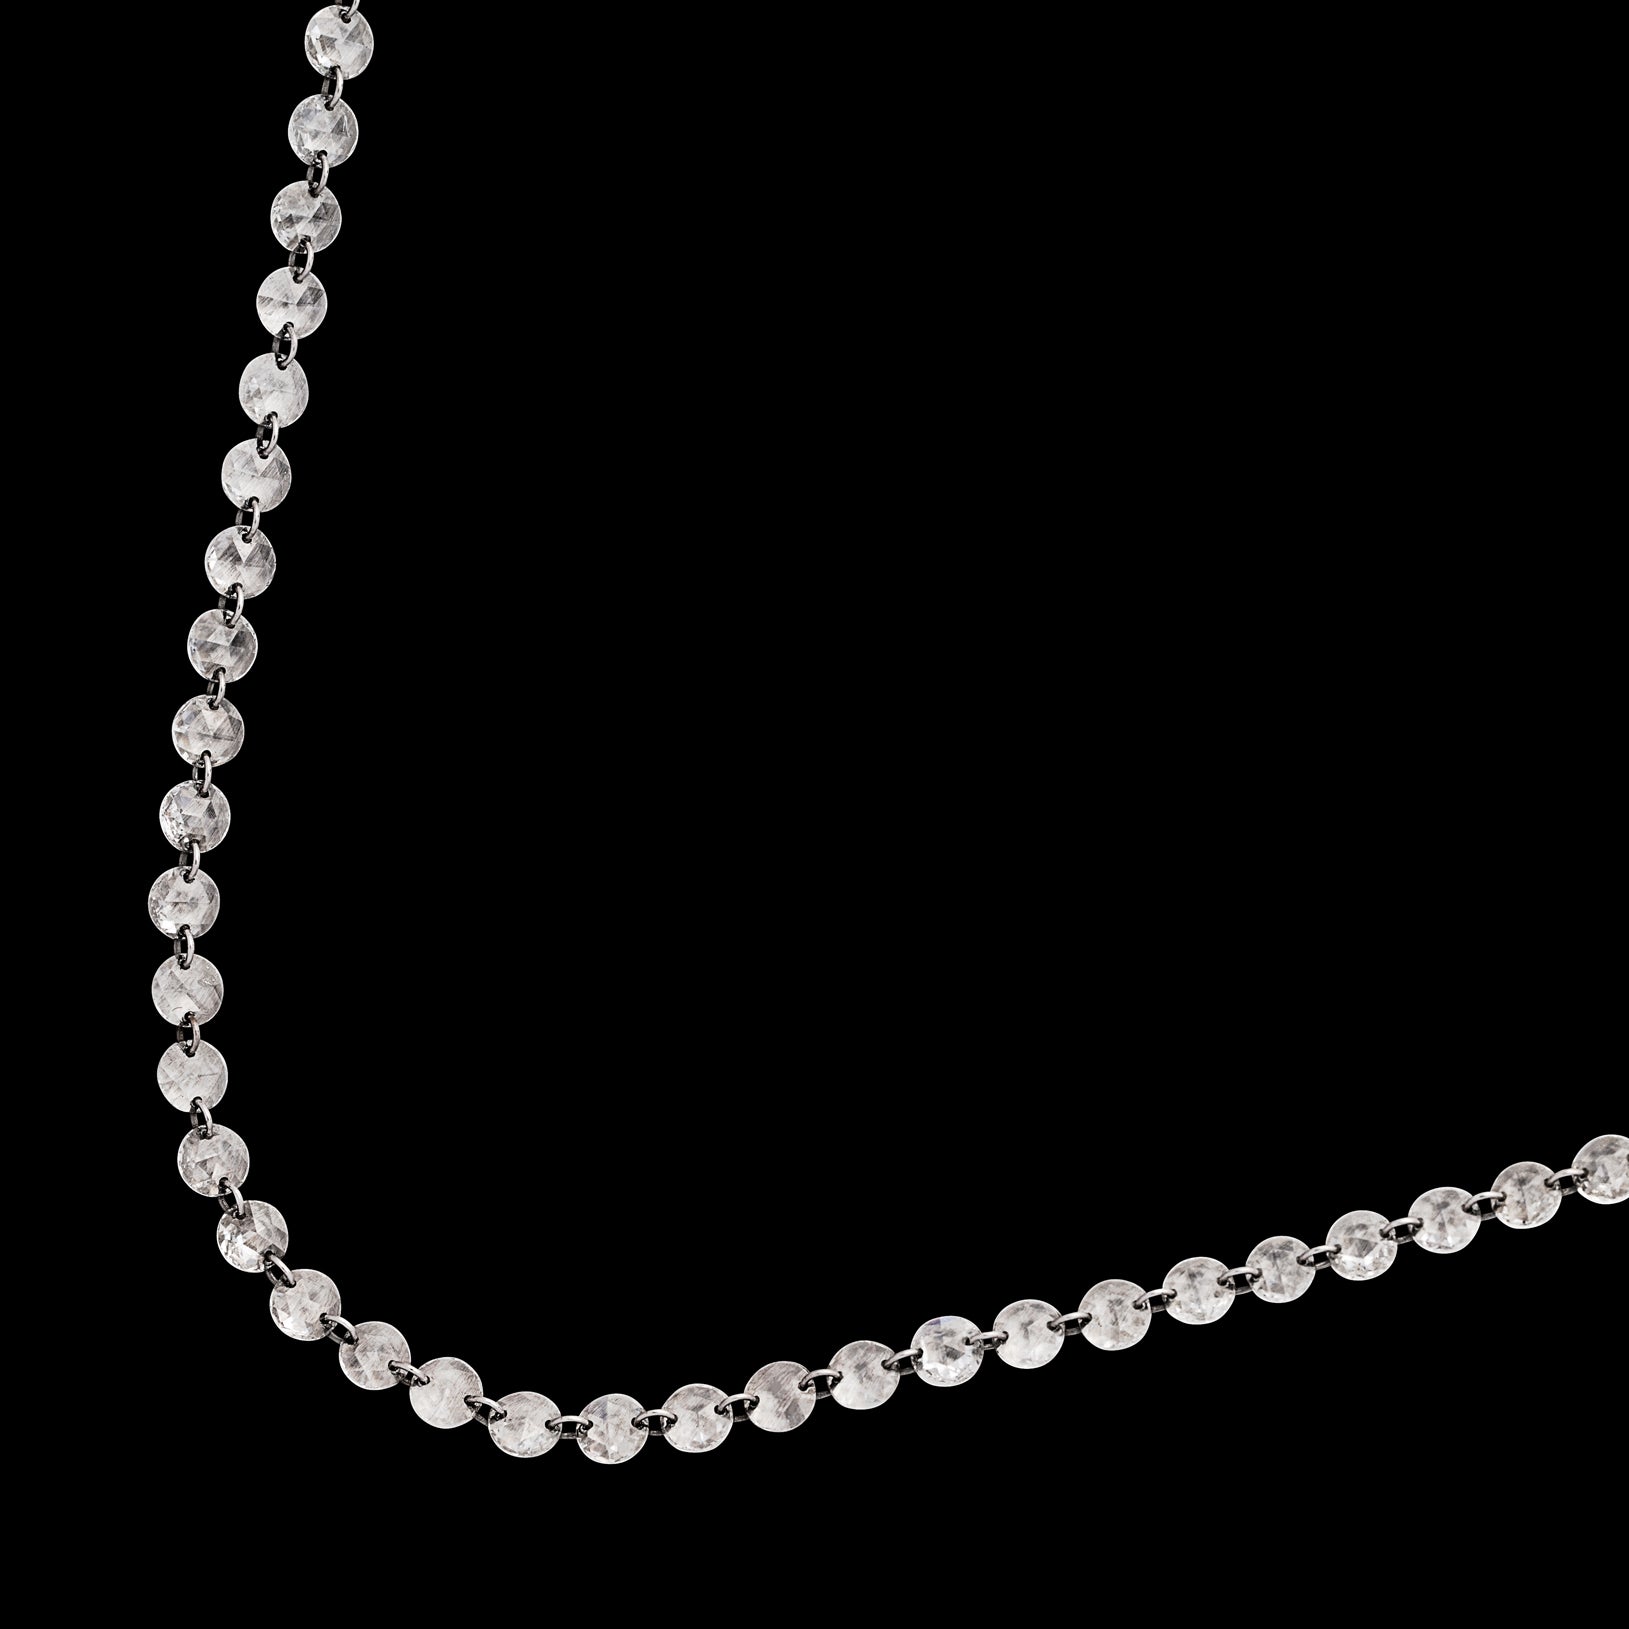 An absolute beauty! This 18 karat white gold necklace features 131 crystal clear diamonds for a total of 5.79 carats. These unique flat round cut diamonds are woven together directly through each stone, giving the illusion that the diamonds are